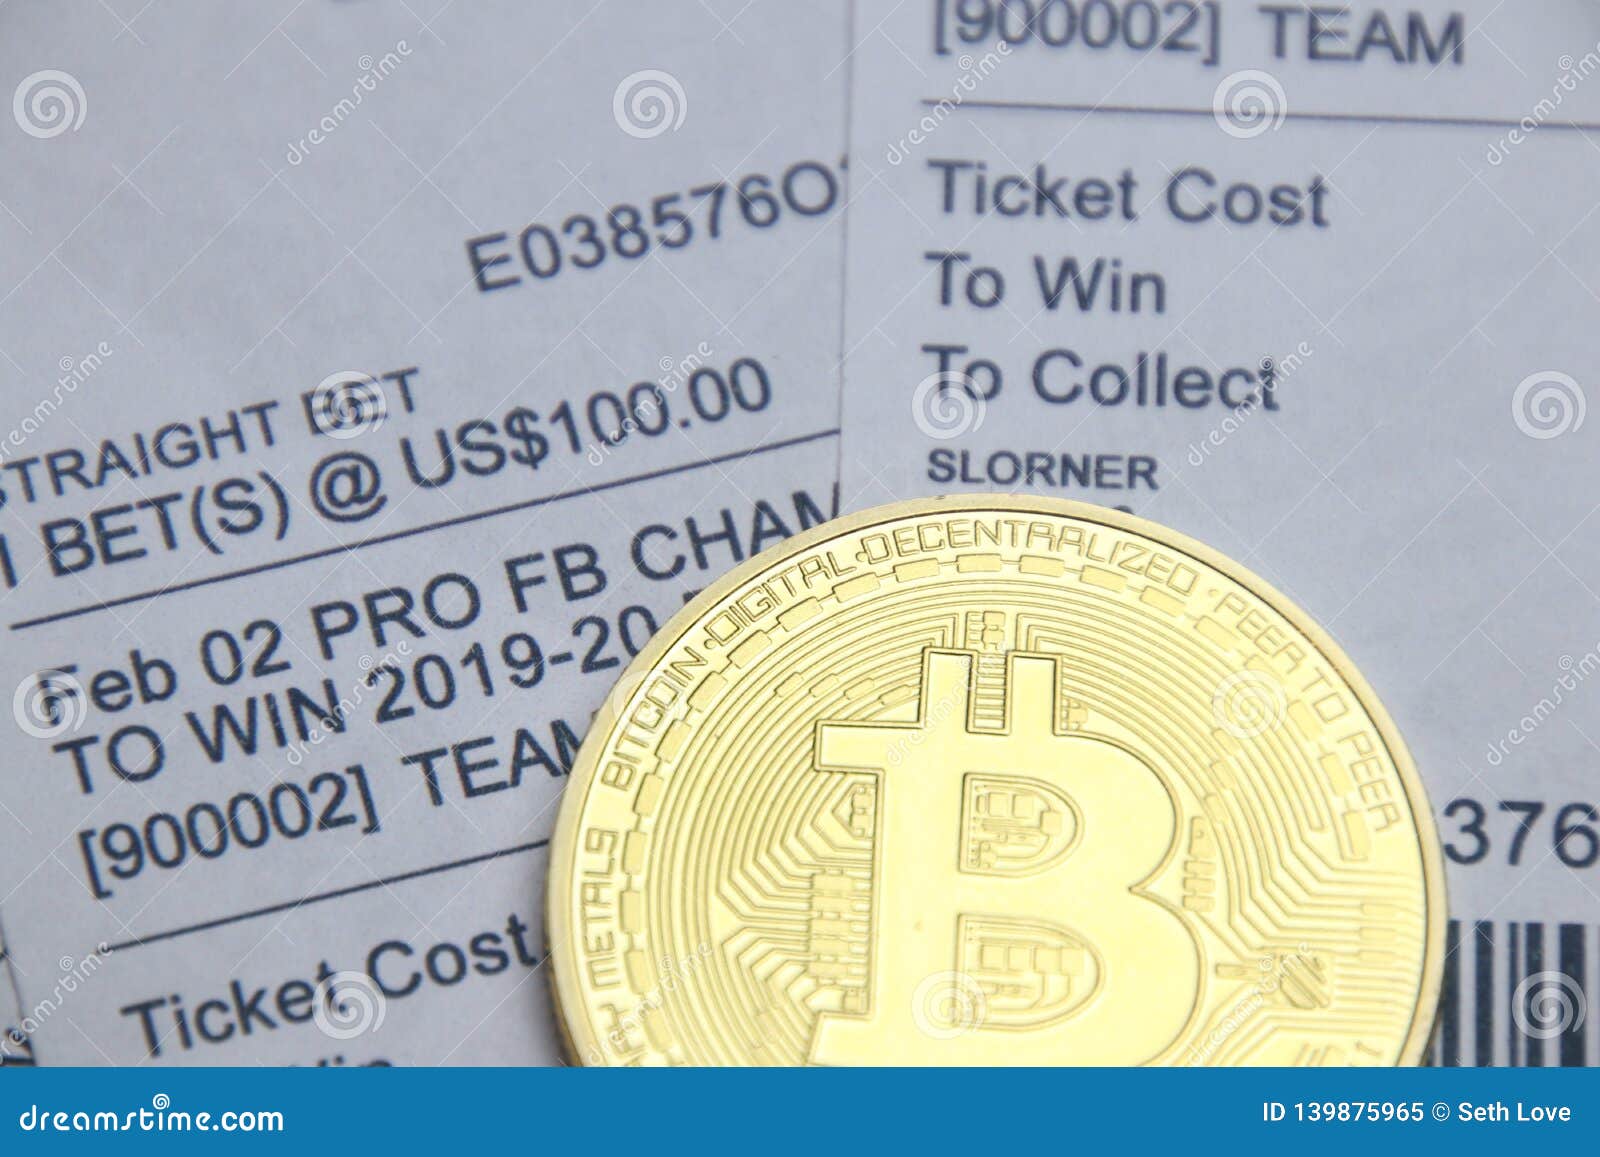 buy sports tickets with bitcoin